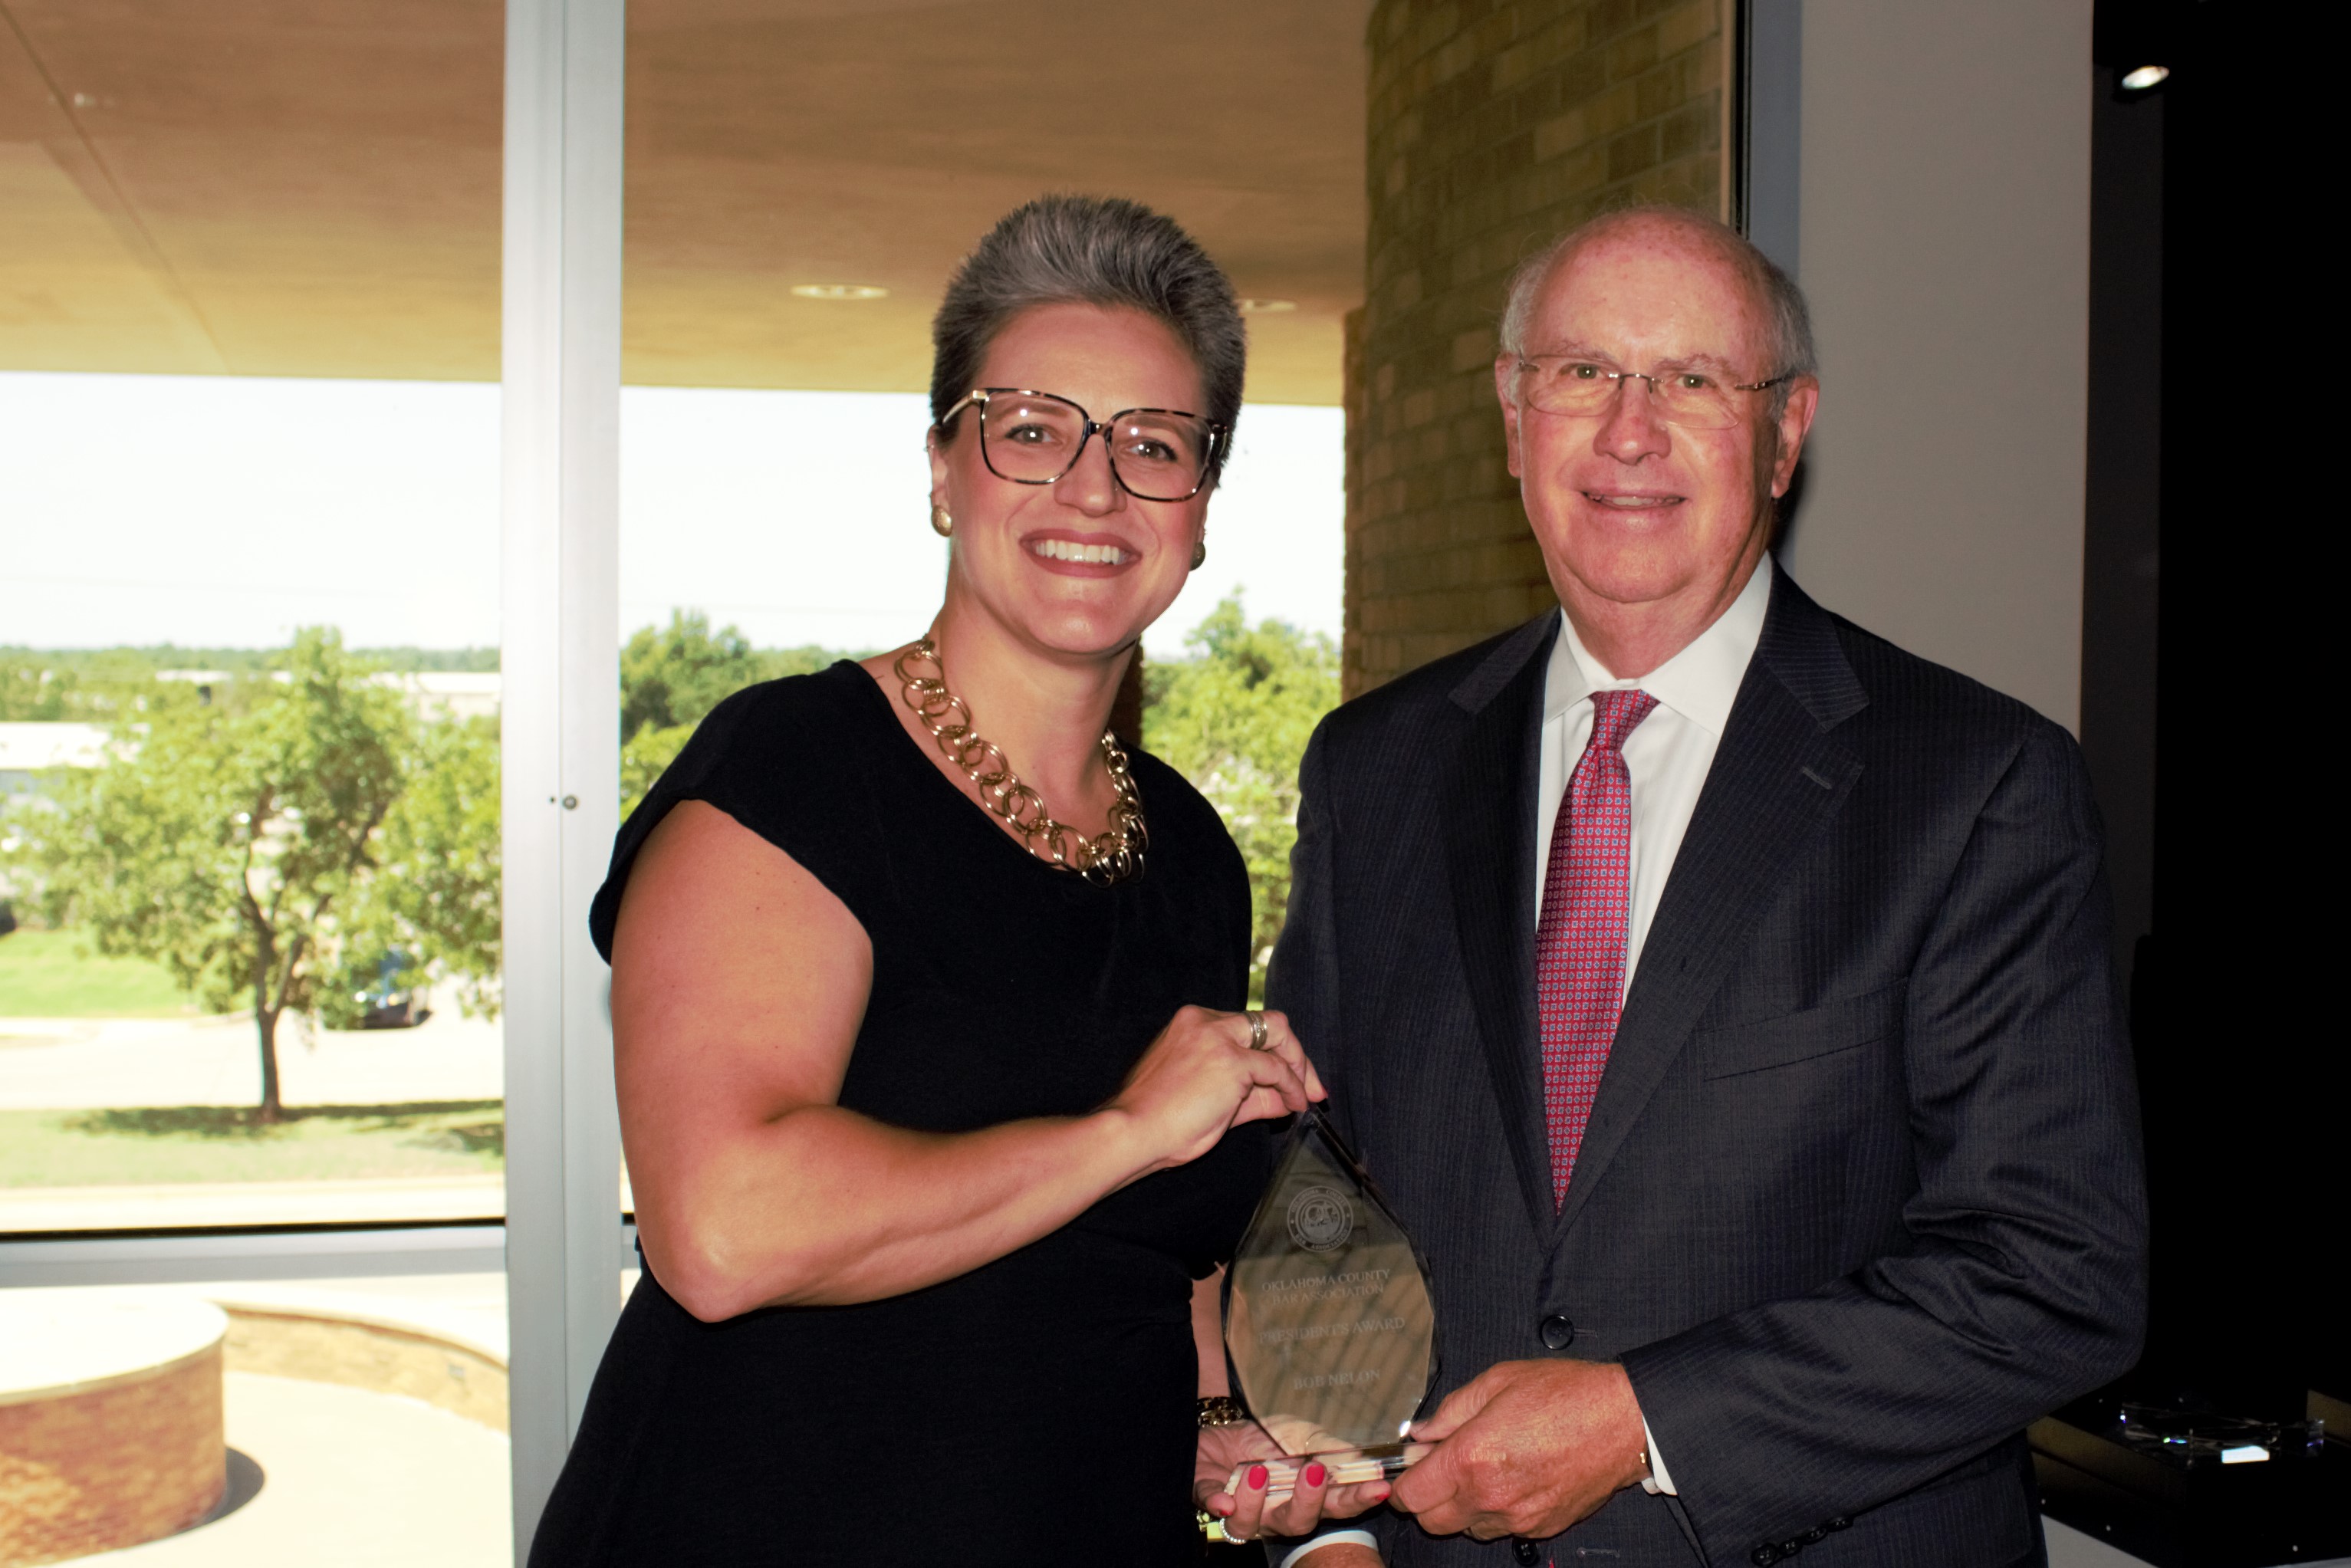 Congratulations to OKC Media and First Amendment Attorney Bob Nelon who received the Oklahoma County Bar Association President’s Special Recognition Award for serving 37 years as Treasurer for the OCBA.